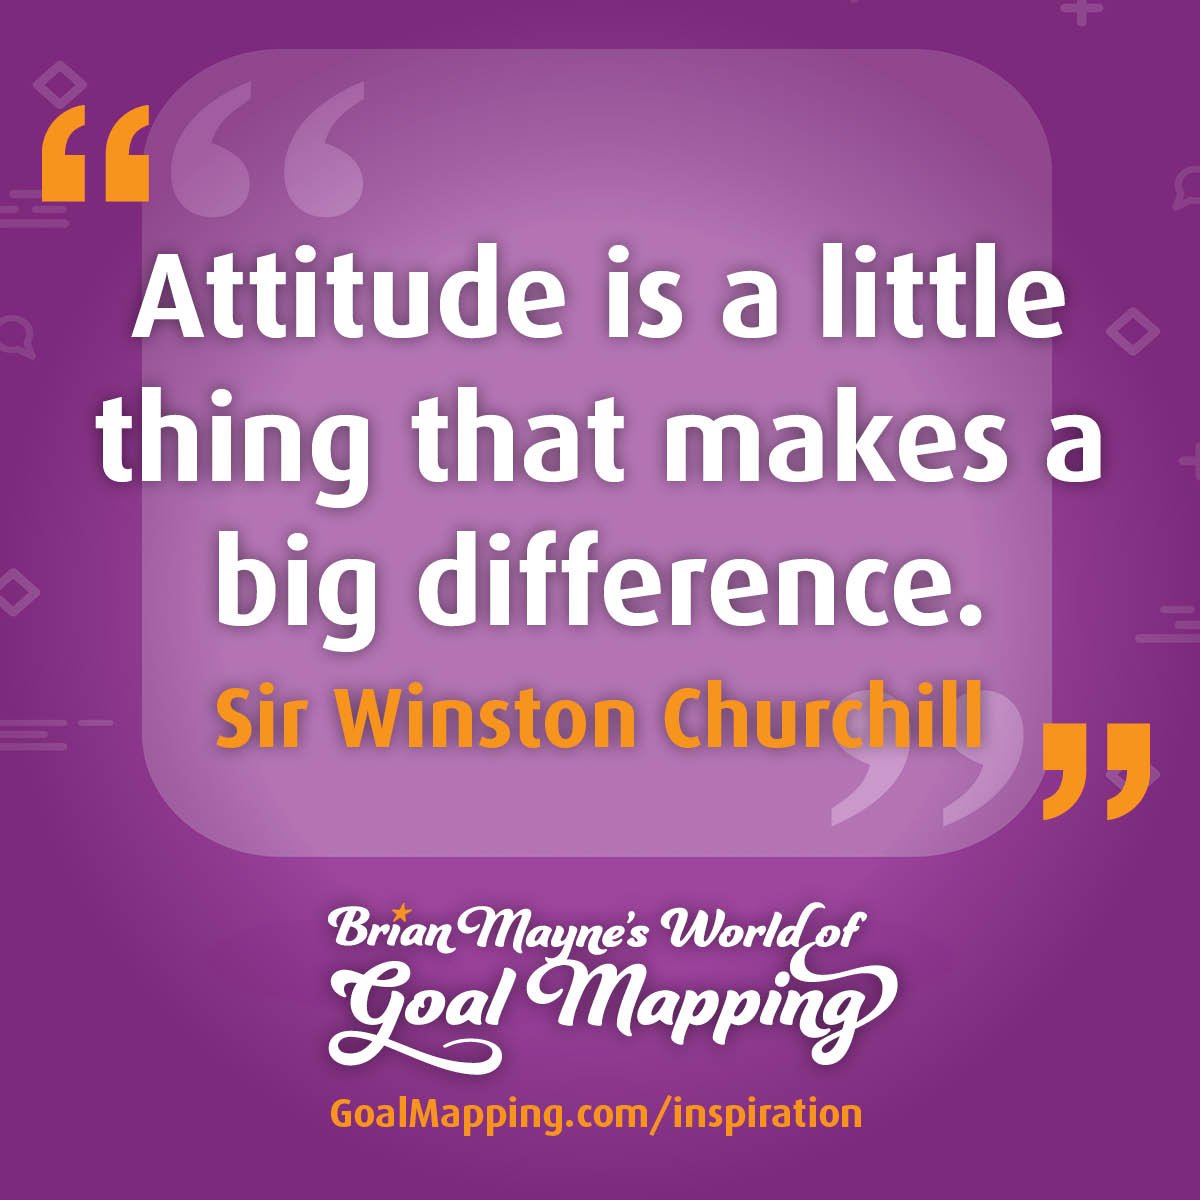 "Attitude is a little thing that makes a big difference." Sir Winston Churchill